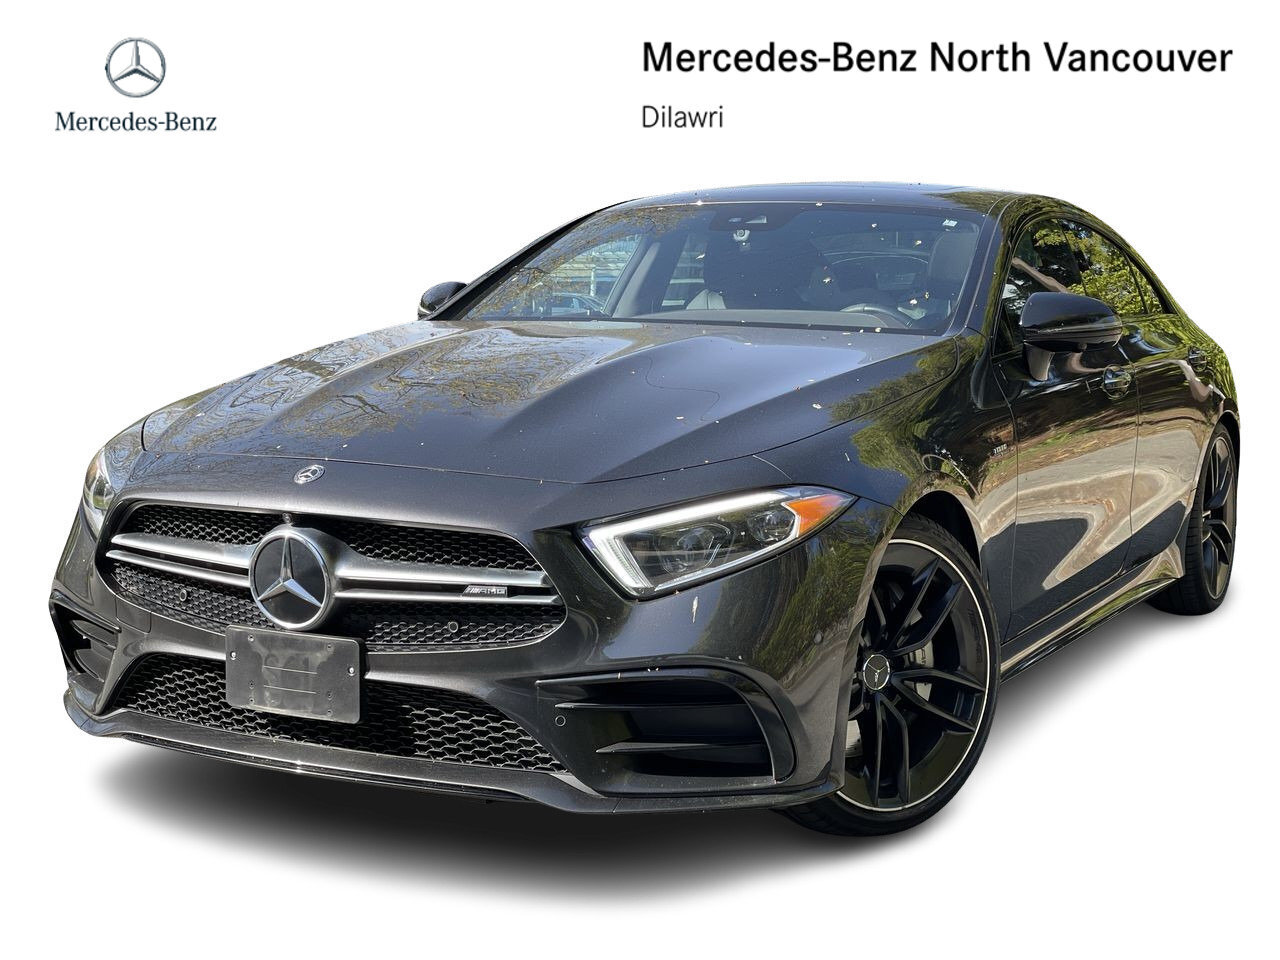 2021 Mercedes-Benz CLS53 AMG 4MATIC+ Coupe 